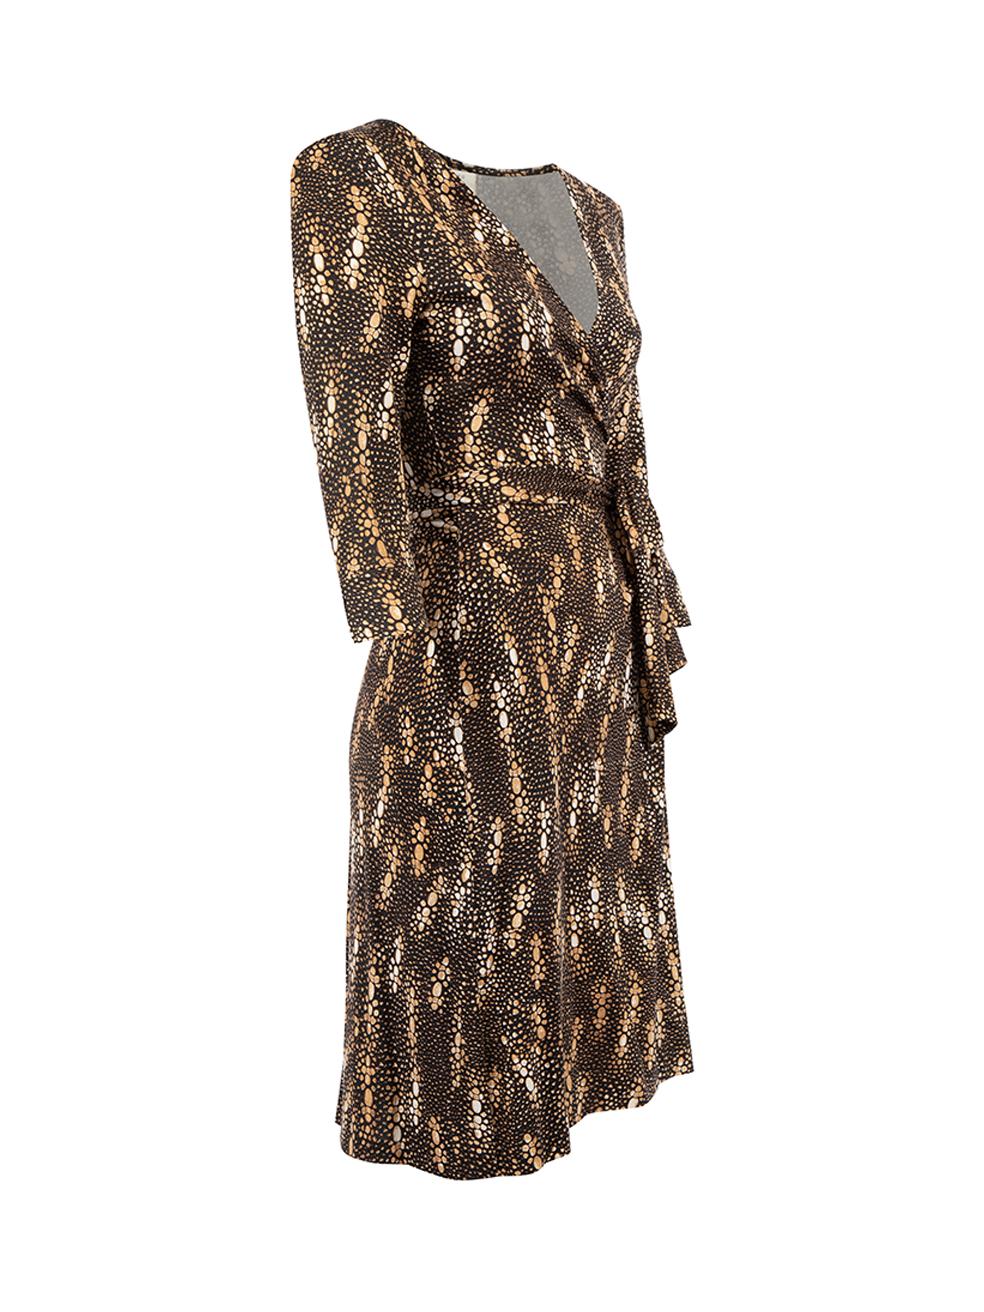 CONDITION is Very good. Minimal wear to dress is evident. Minimal wear to the interior label, armpit fabric and outer silk fabric on this used Diane Von Furstenberg designer resale item.   Details  Brown Silk Wrap dress Knee length Bubbles pattern V